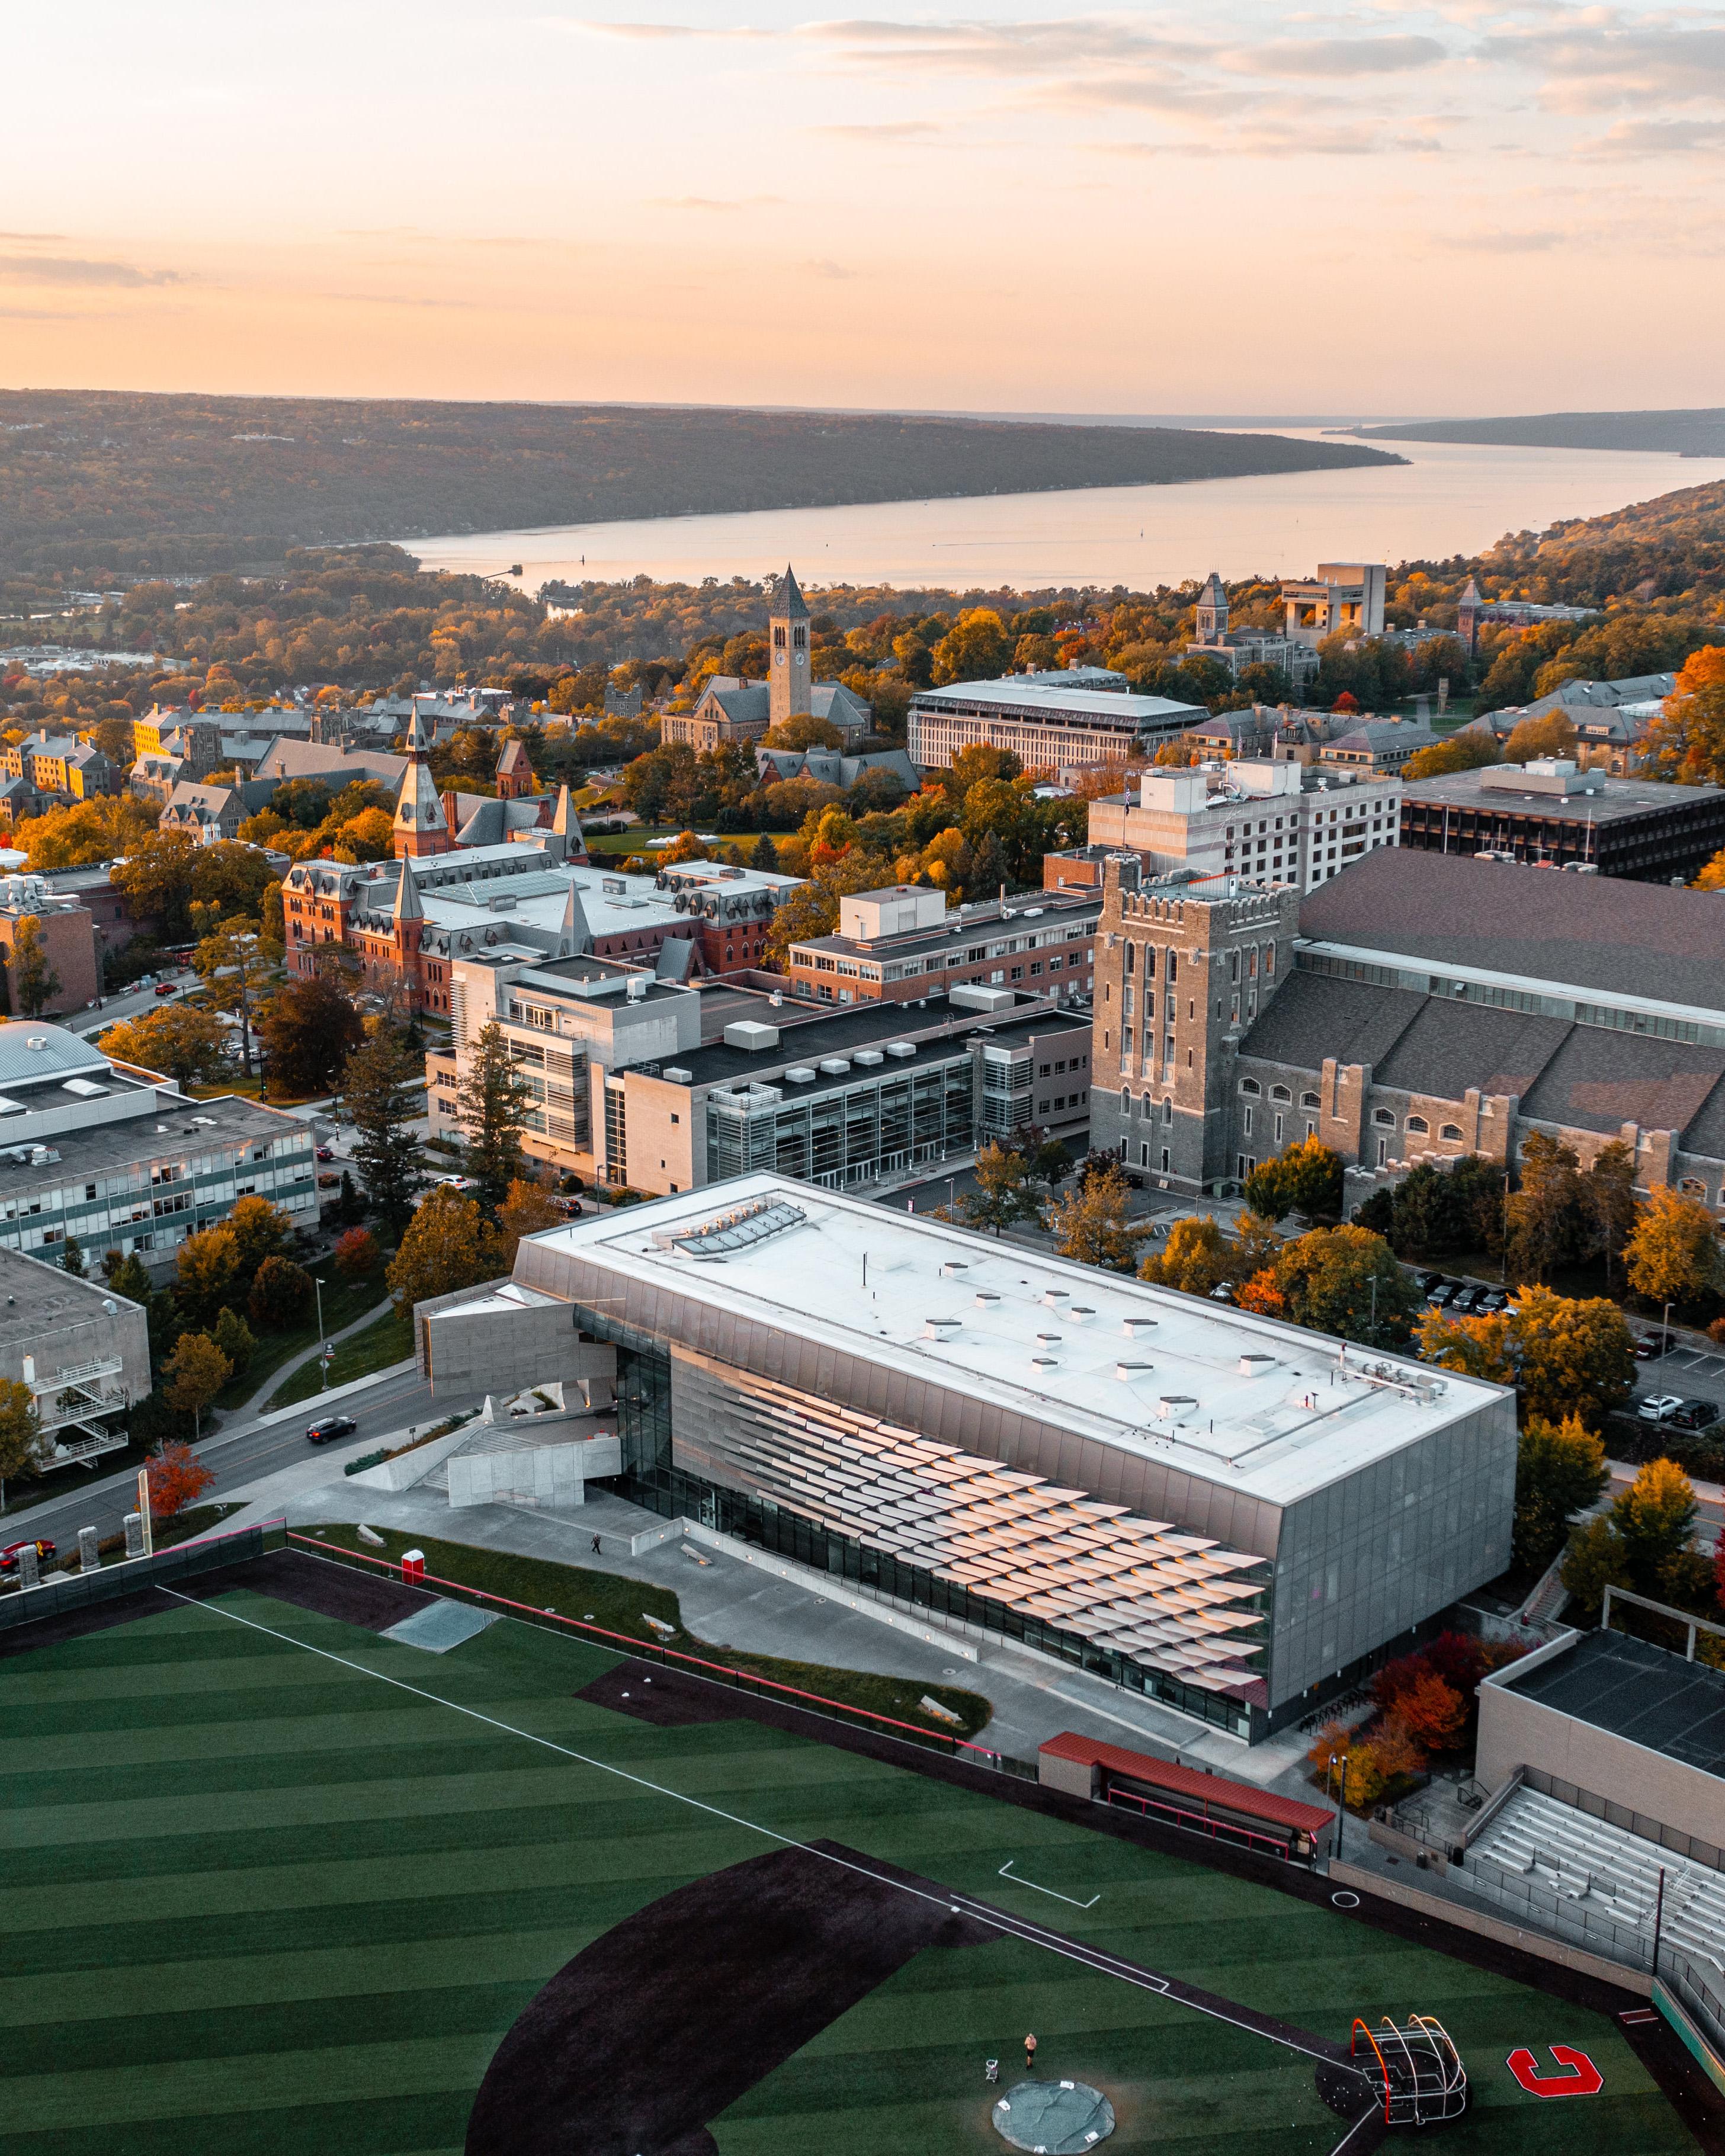 An aerial photo of the Cornell Ithaca campus in Ithaca, looking down on gates hall with mcgraw tower and cayuga lake in the distance